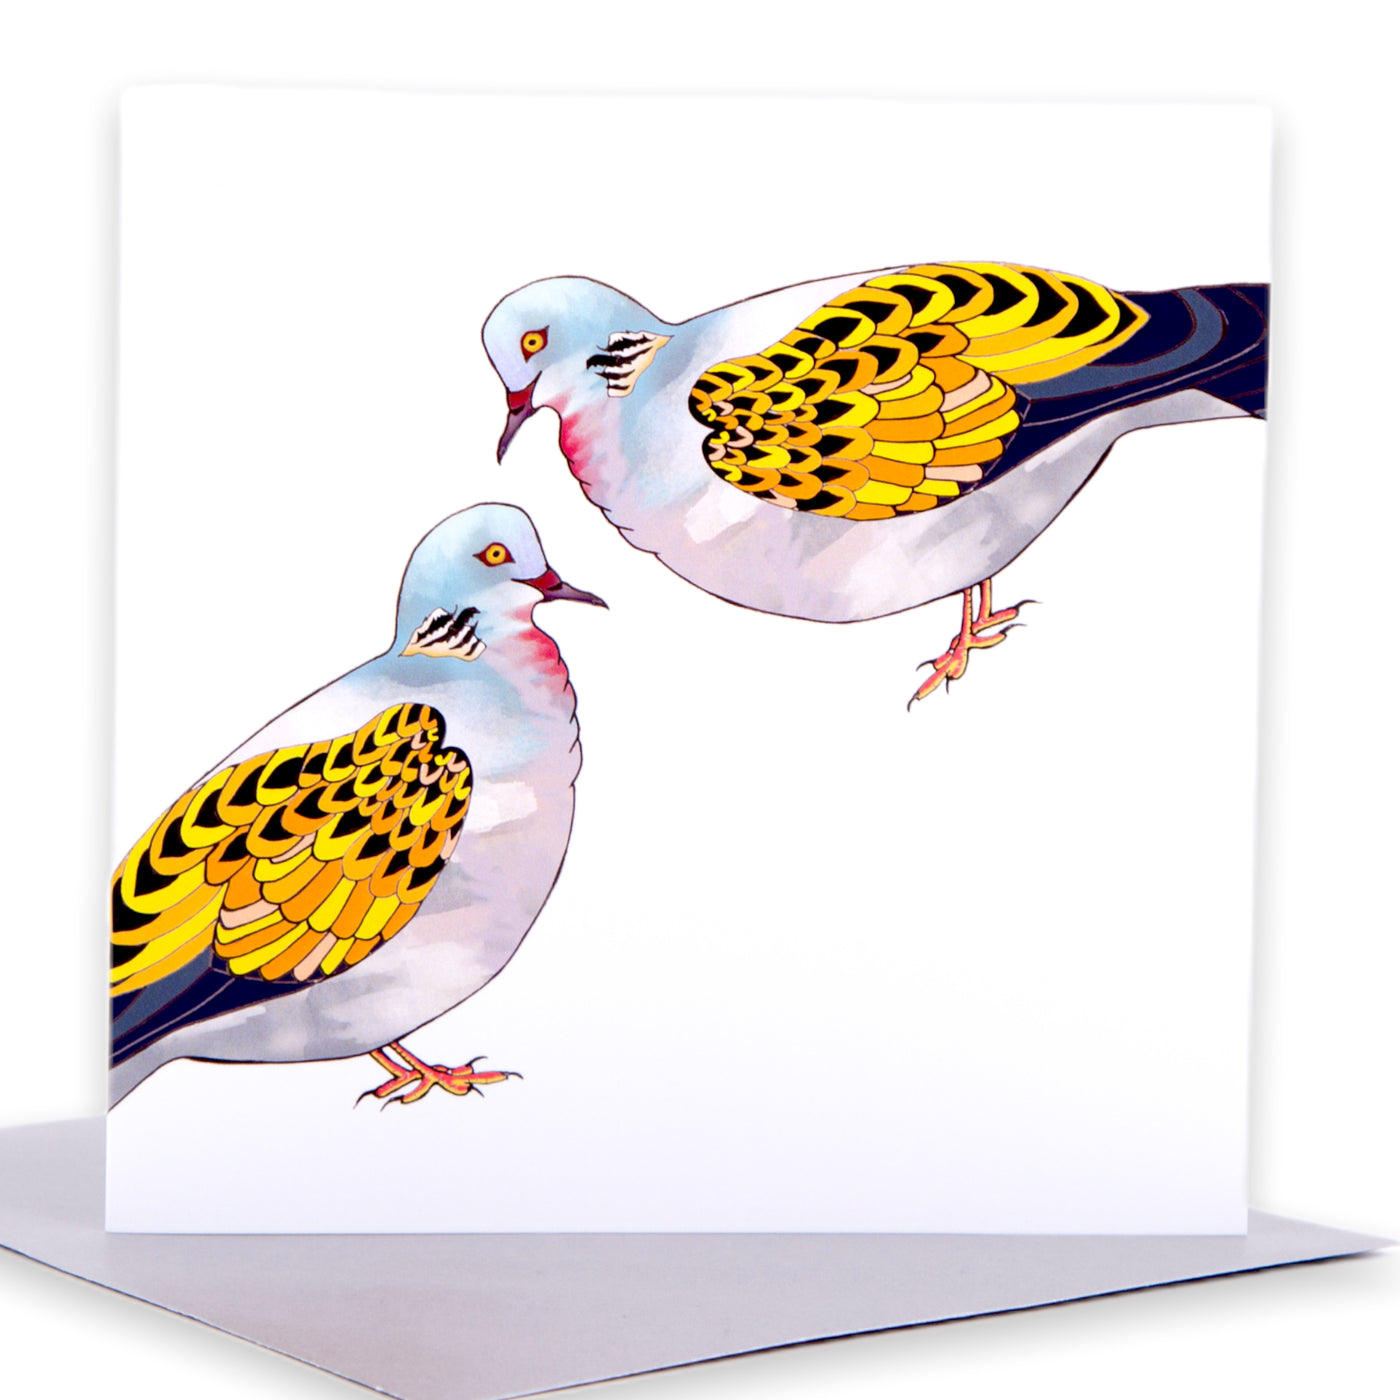 Turtle Doves Greetings Card